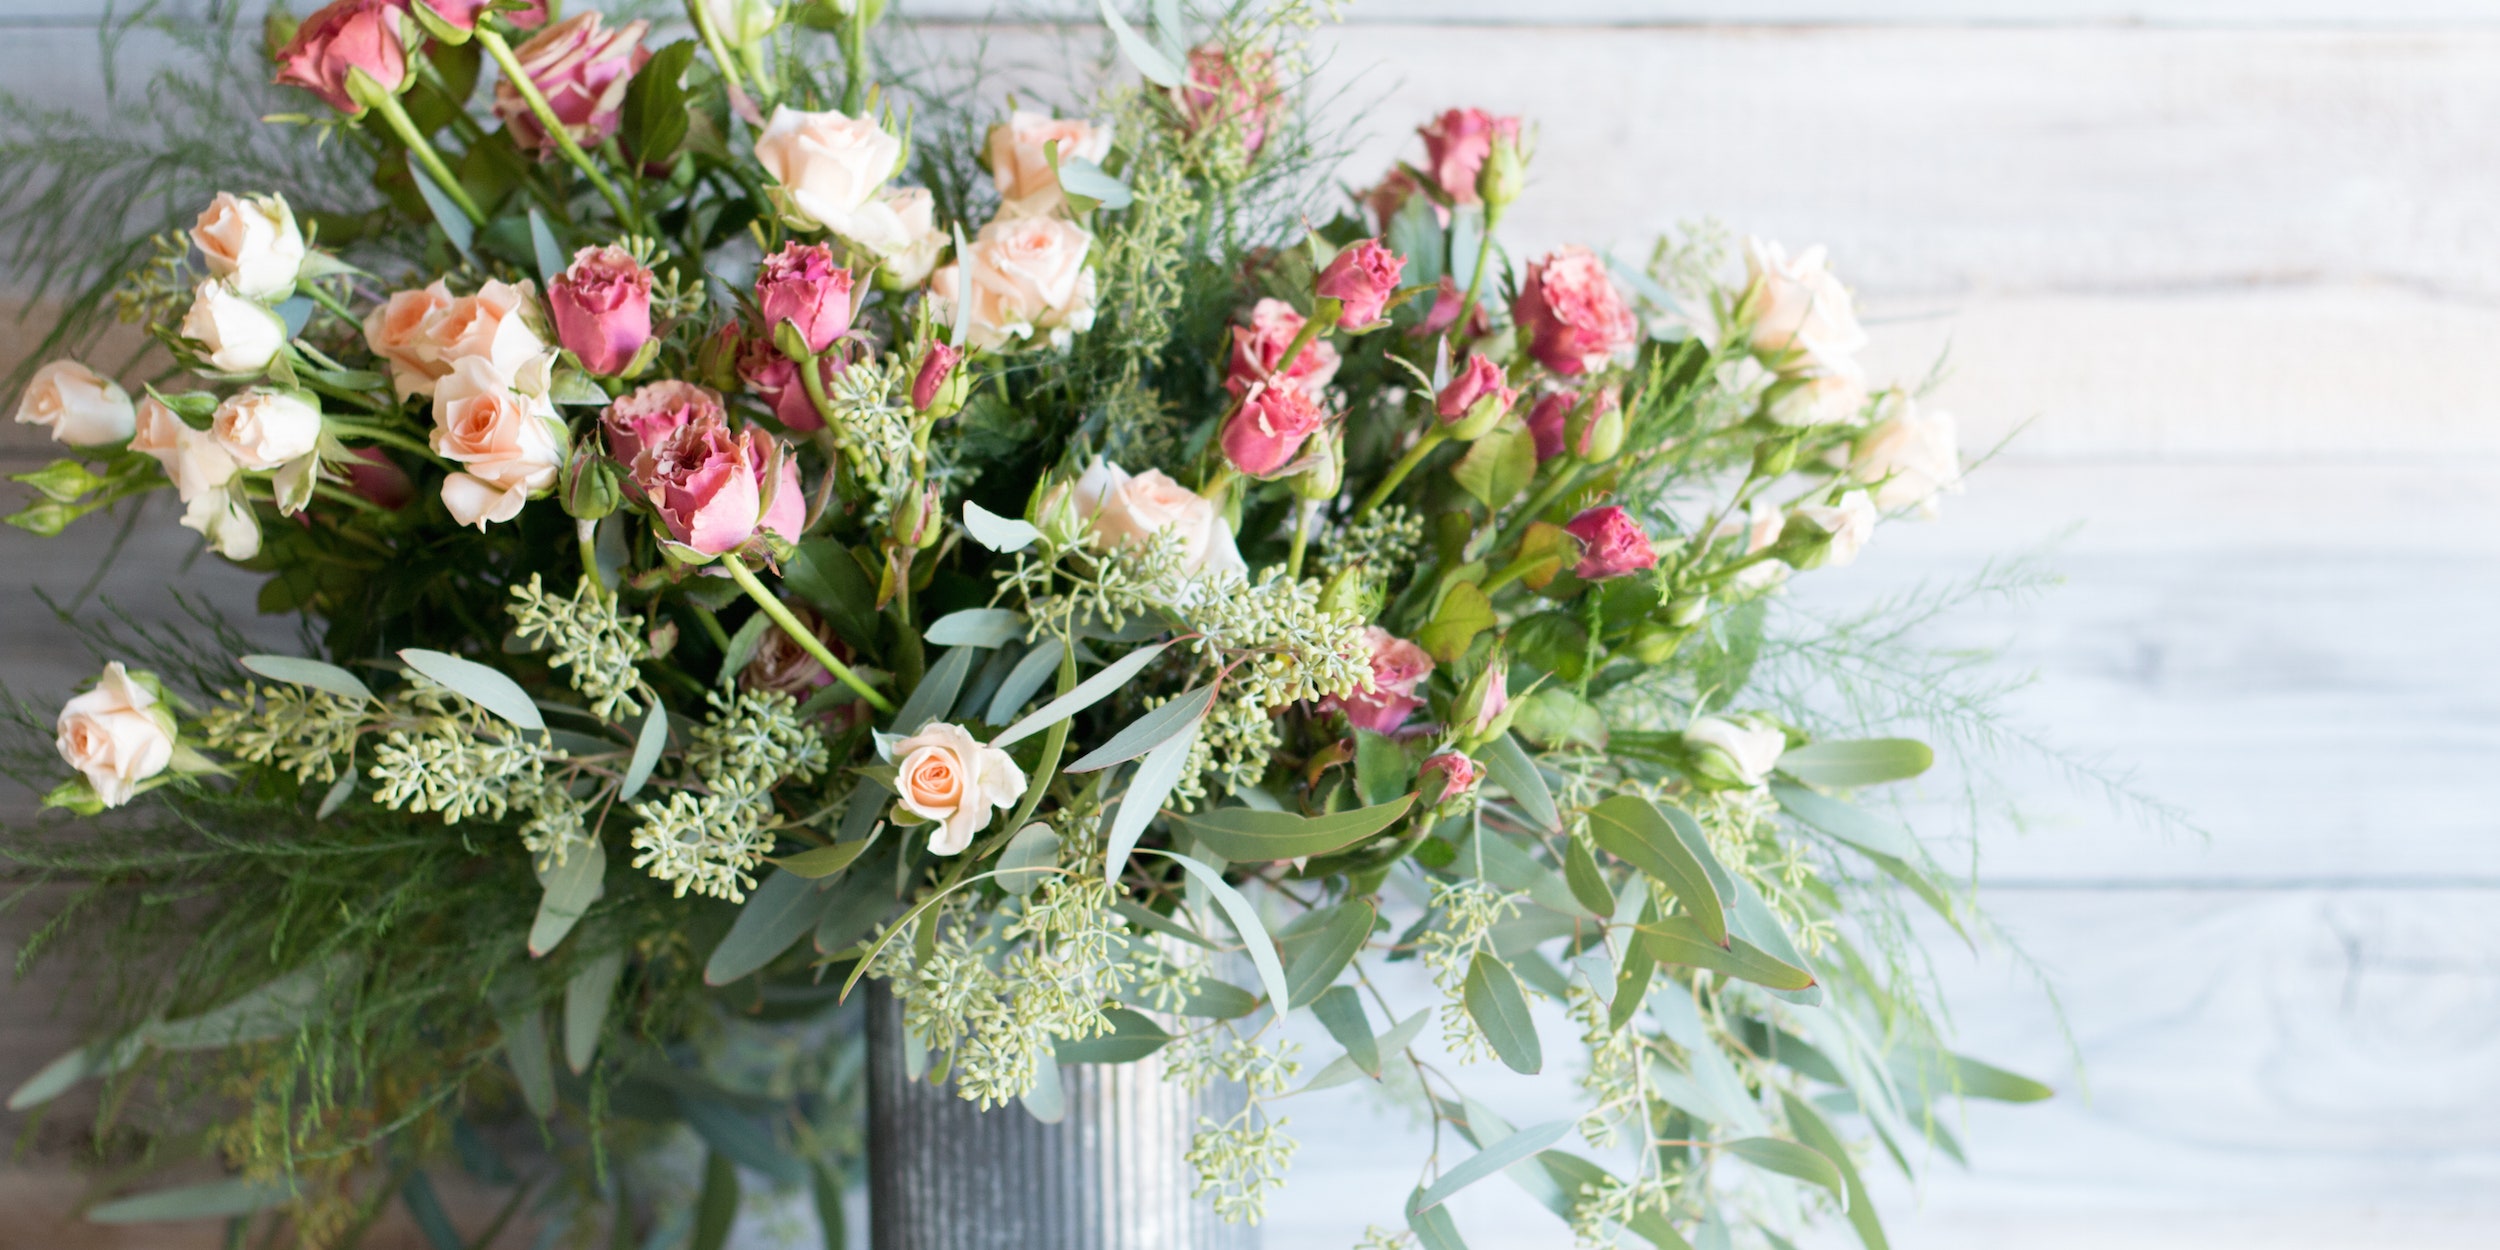 Expert Design Tips for Creating the Perfect Floral Arrangement